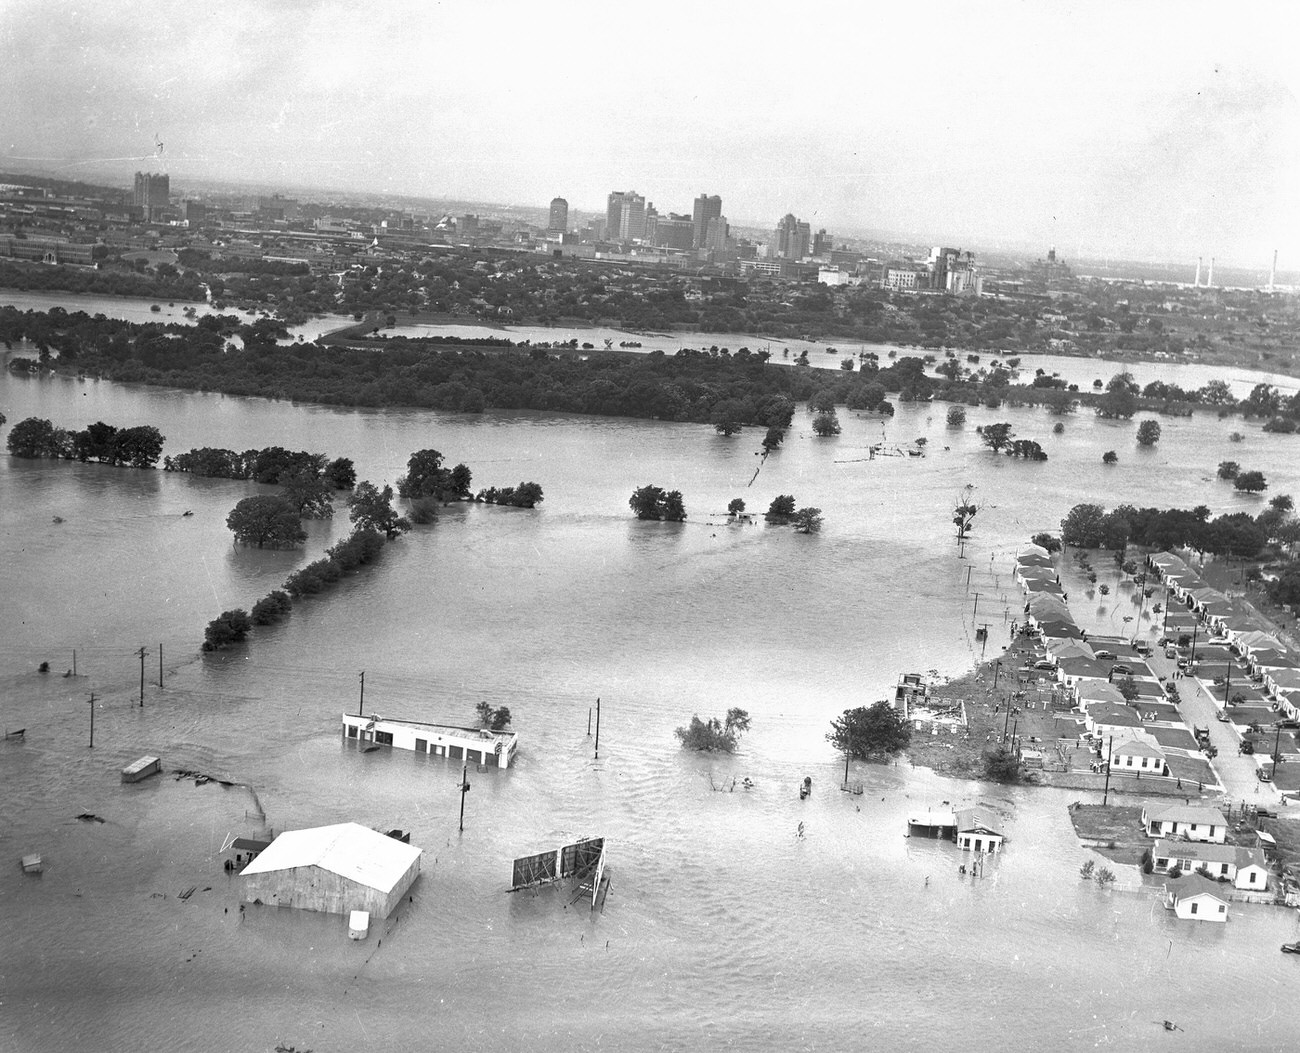 Fort Worth, Texas, flood of 1949, showing submerged homes. Downtown Fort Worth is visible in the distance.